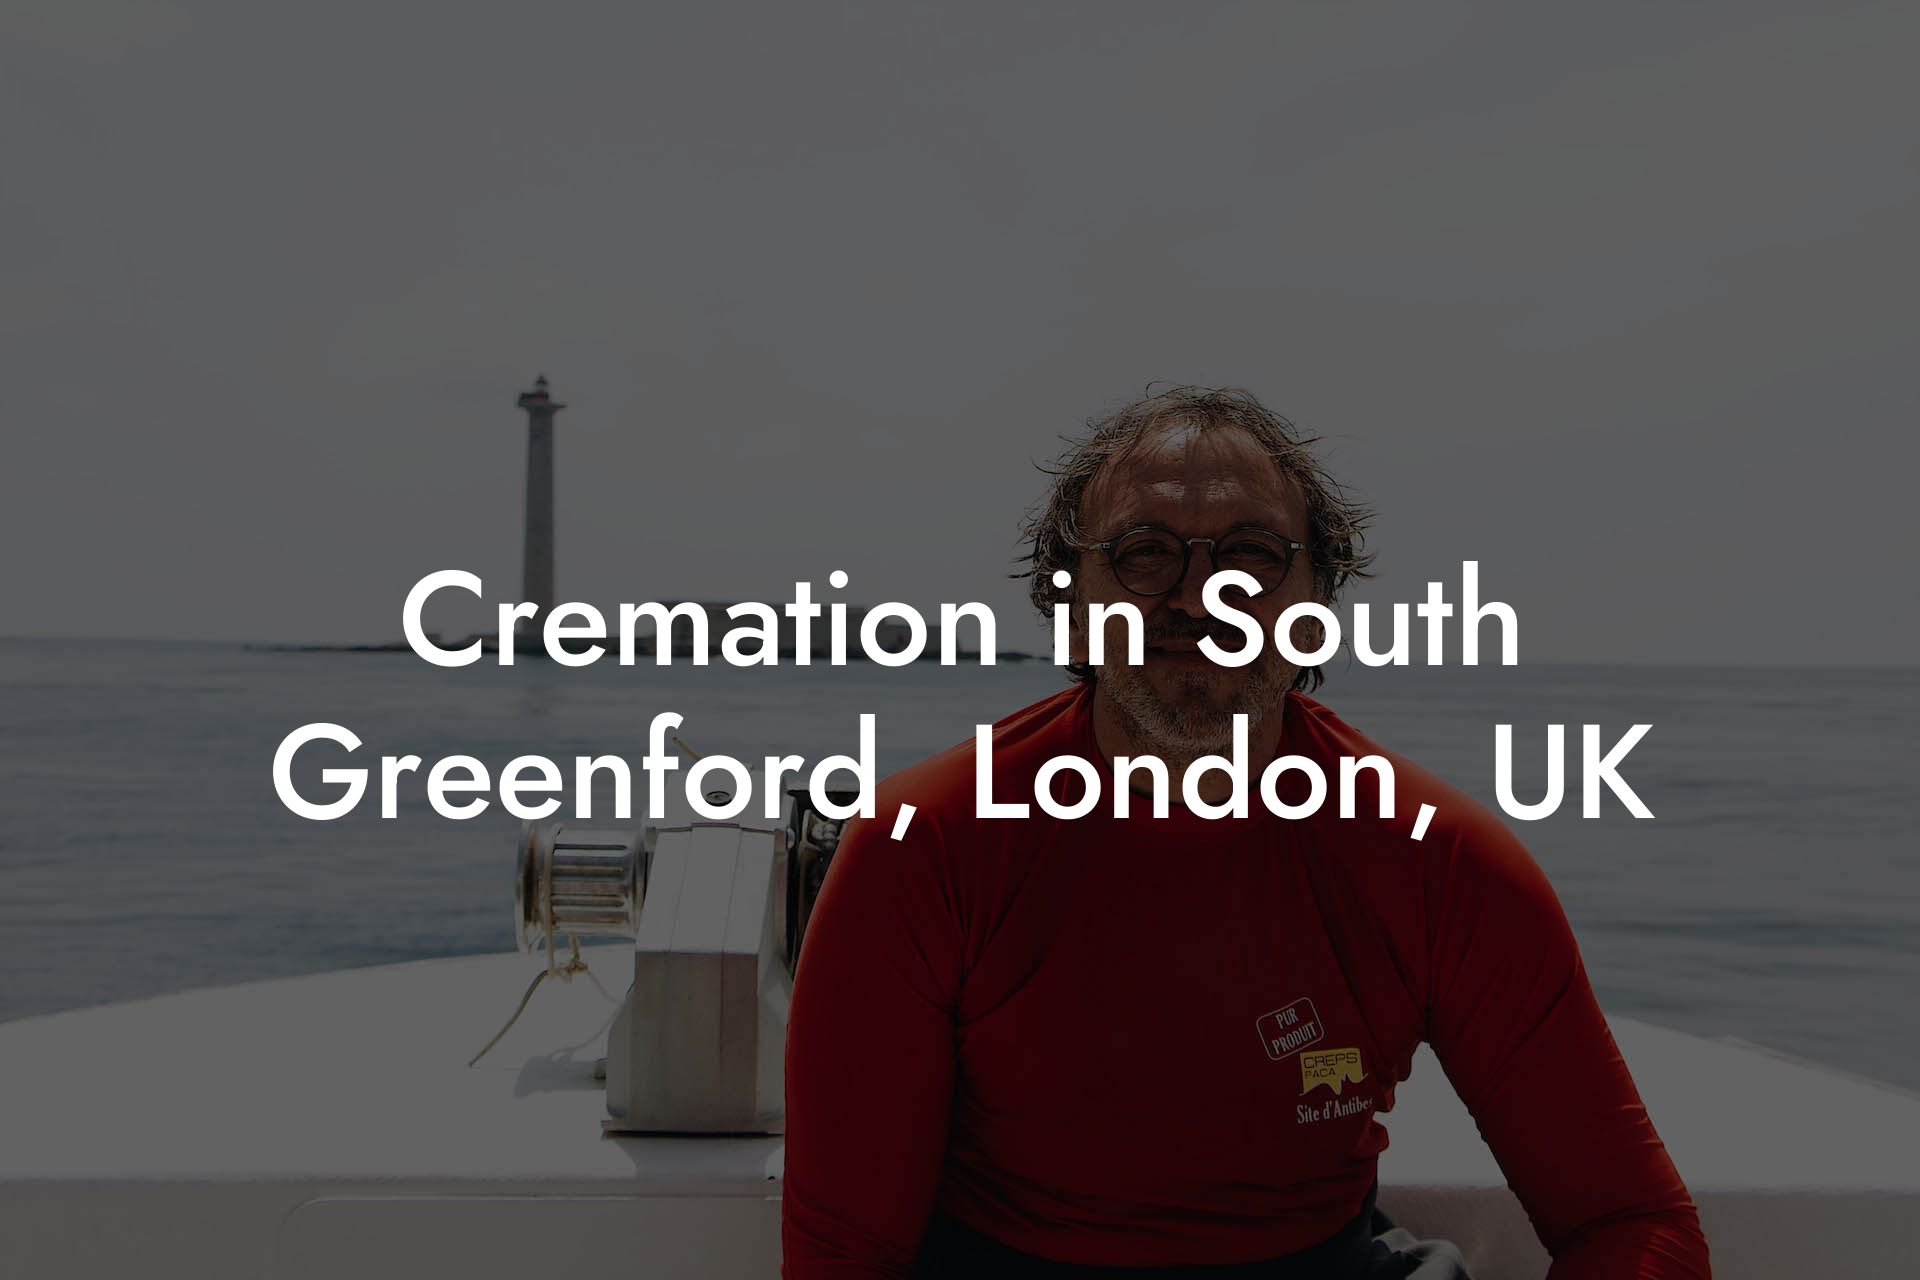 Cremation in South Greenford, London, UK